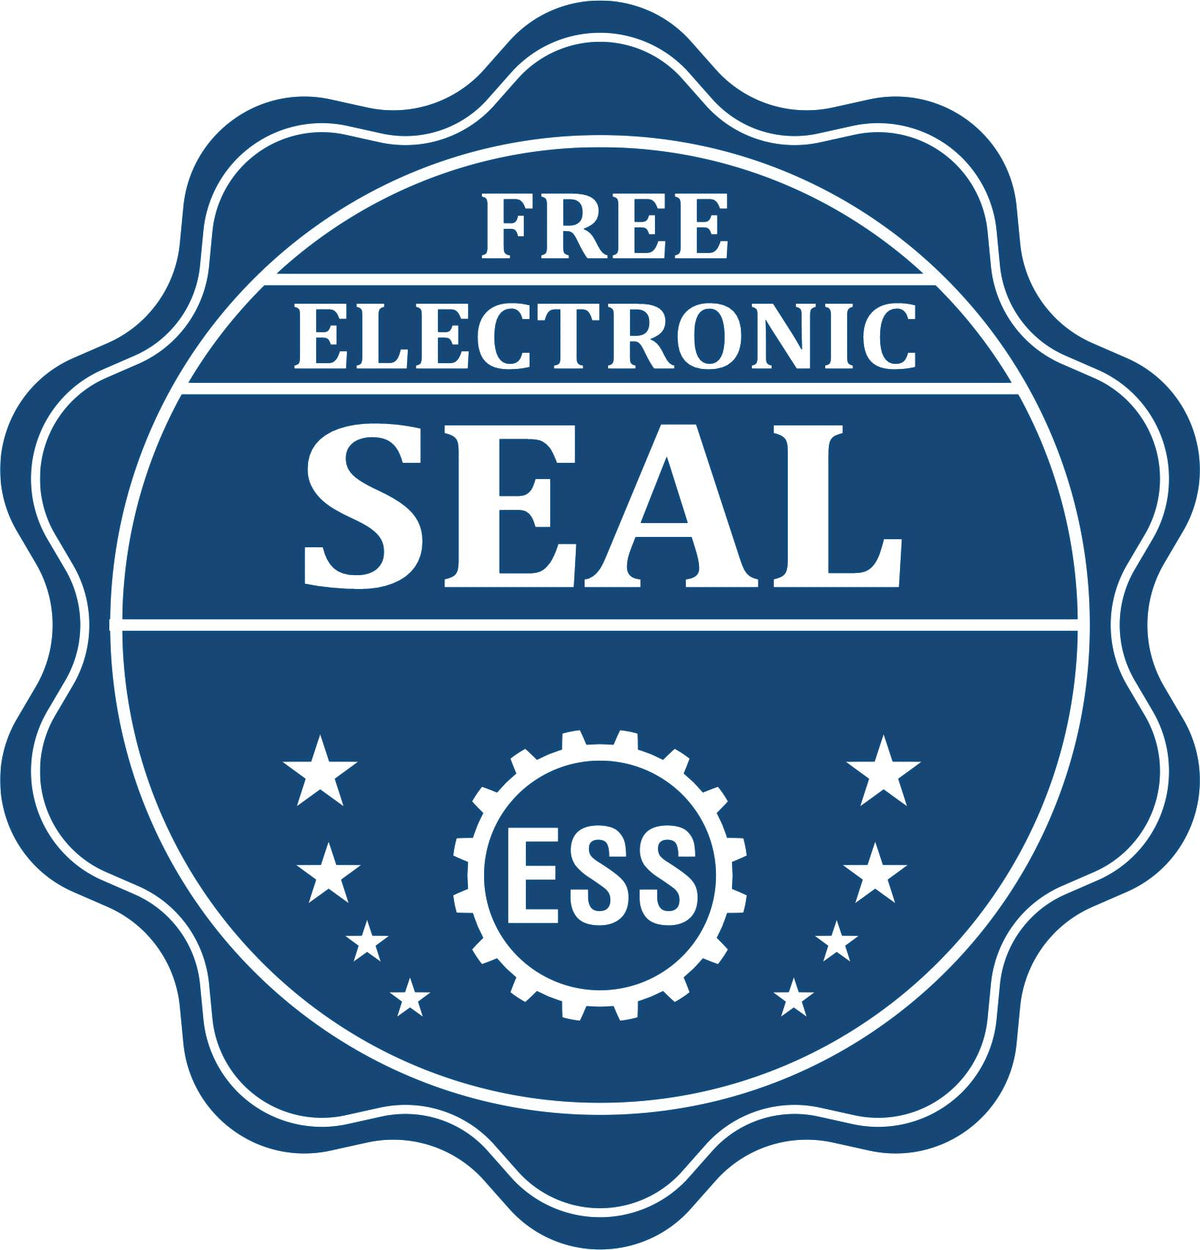 A badge showing a free electronic seal for the Long Reach Montana PE Seal with stars and the ESS gear on the emblem.